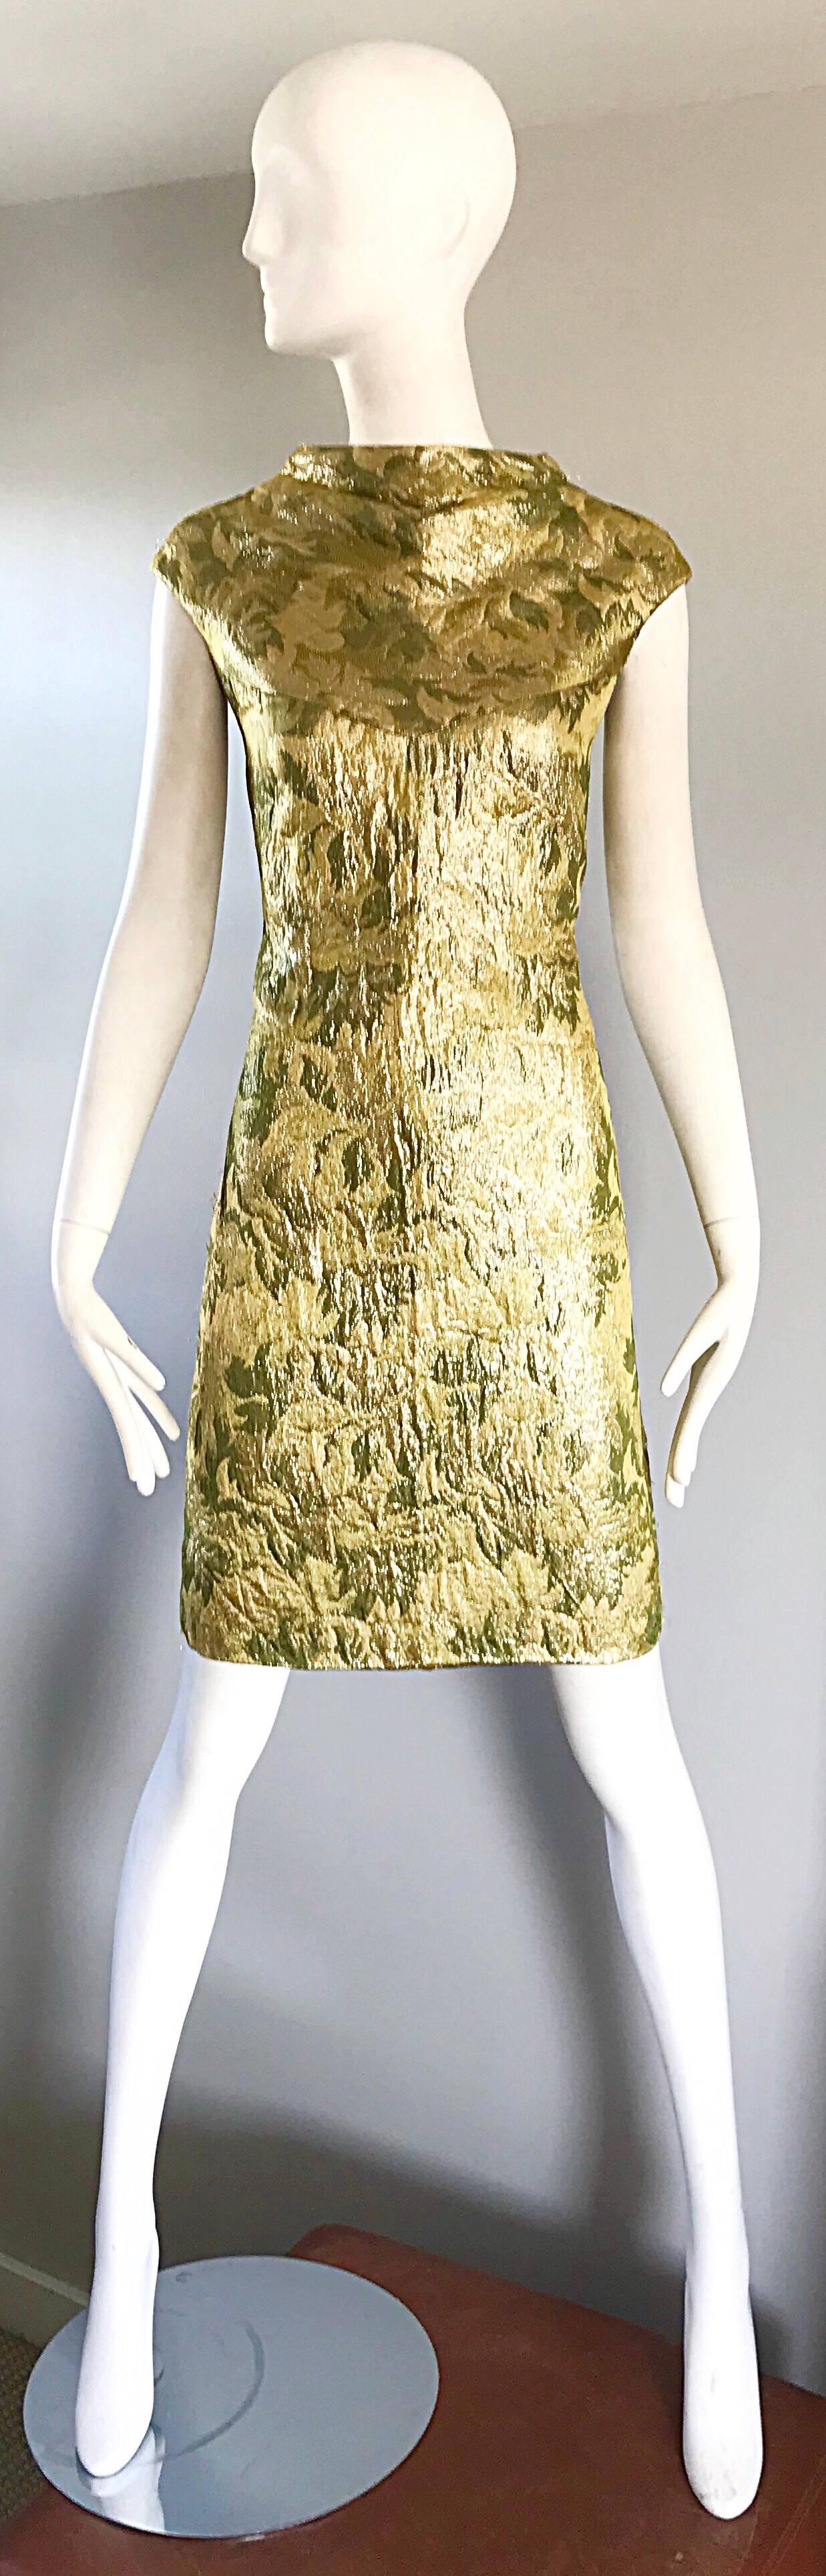 Gorgeous 1960s JOSEPH MAGNIN gold and chartreuse green metallic silk shift dress! Features a striking print, with an incredible fit! Fitted bodice, with a straight skirt. Full metal zipper up the back with hook-and-eye closure. Fully lined. Great